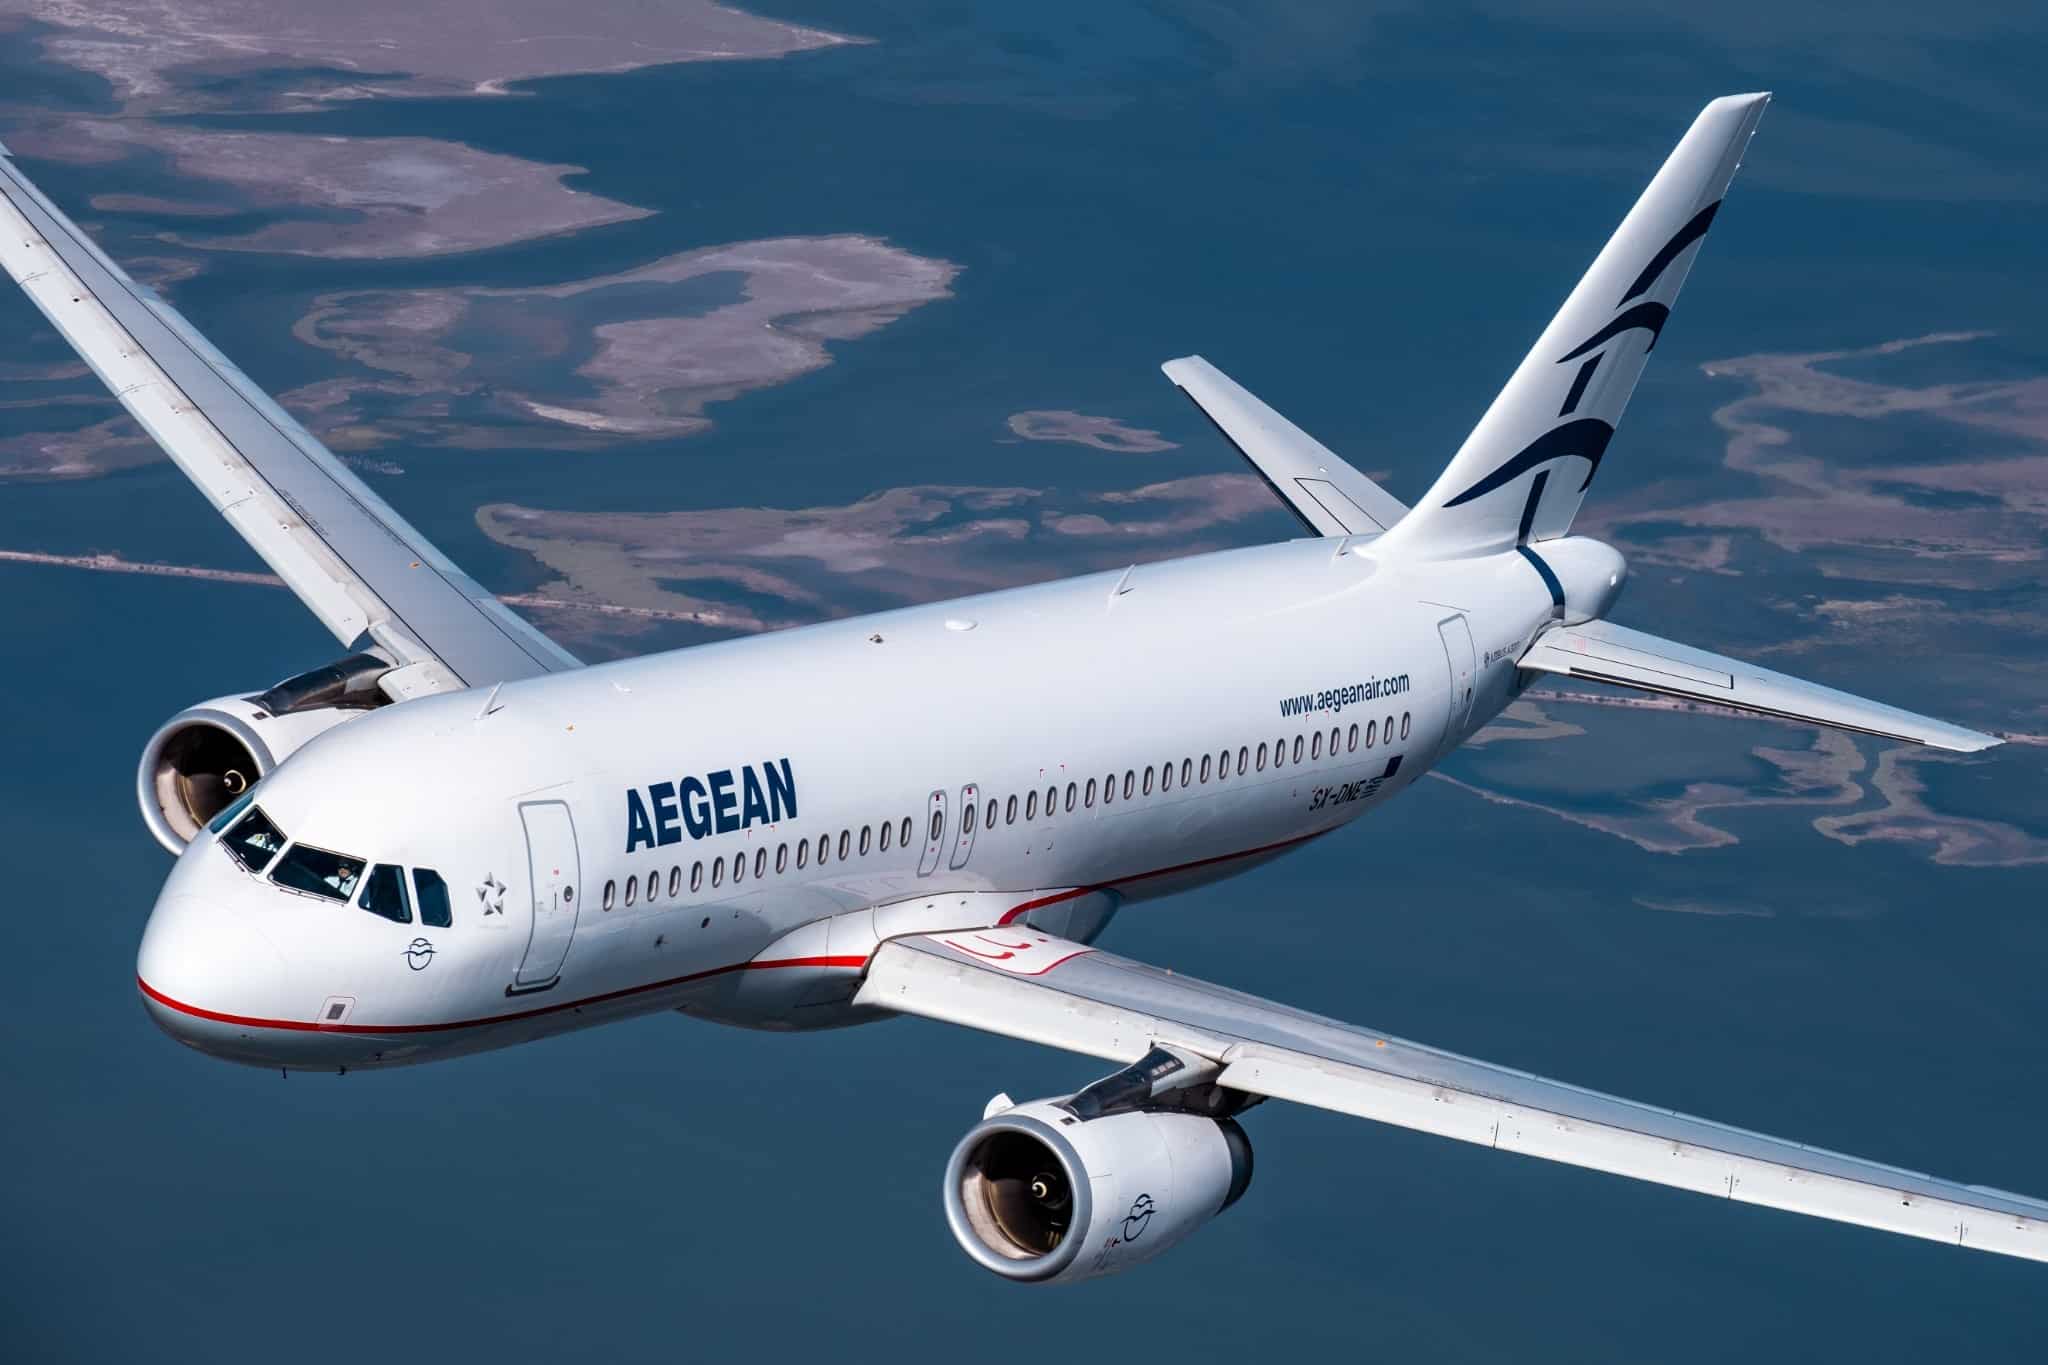 Aegean Airlines counting on help from the government - Greek City Times